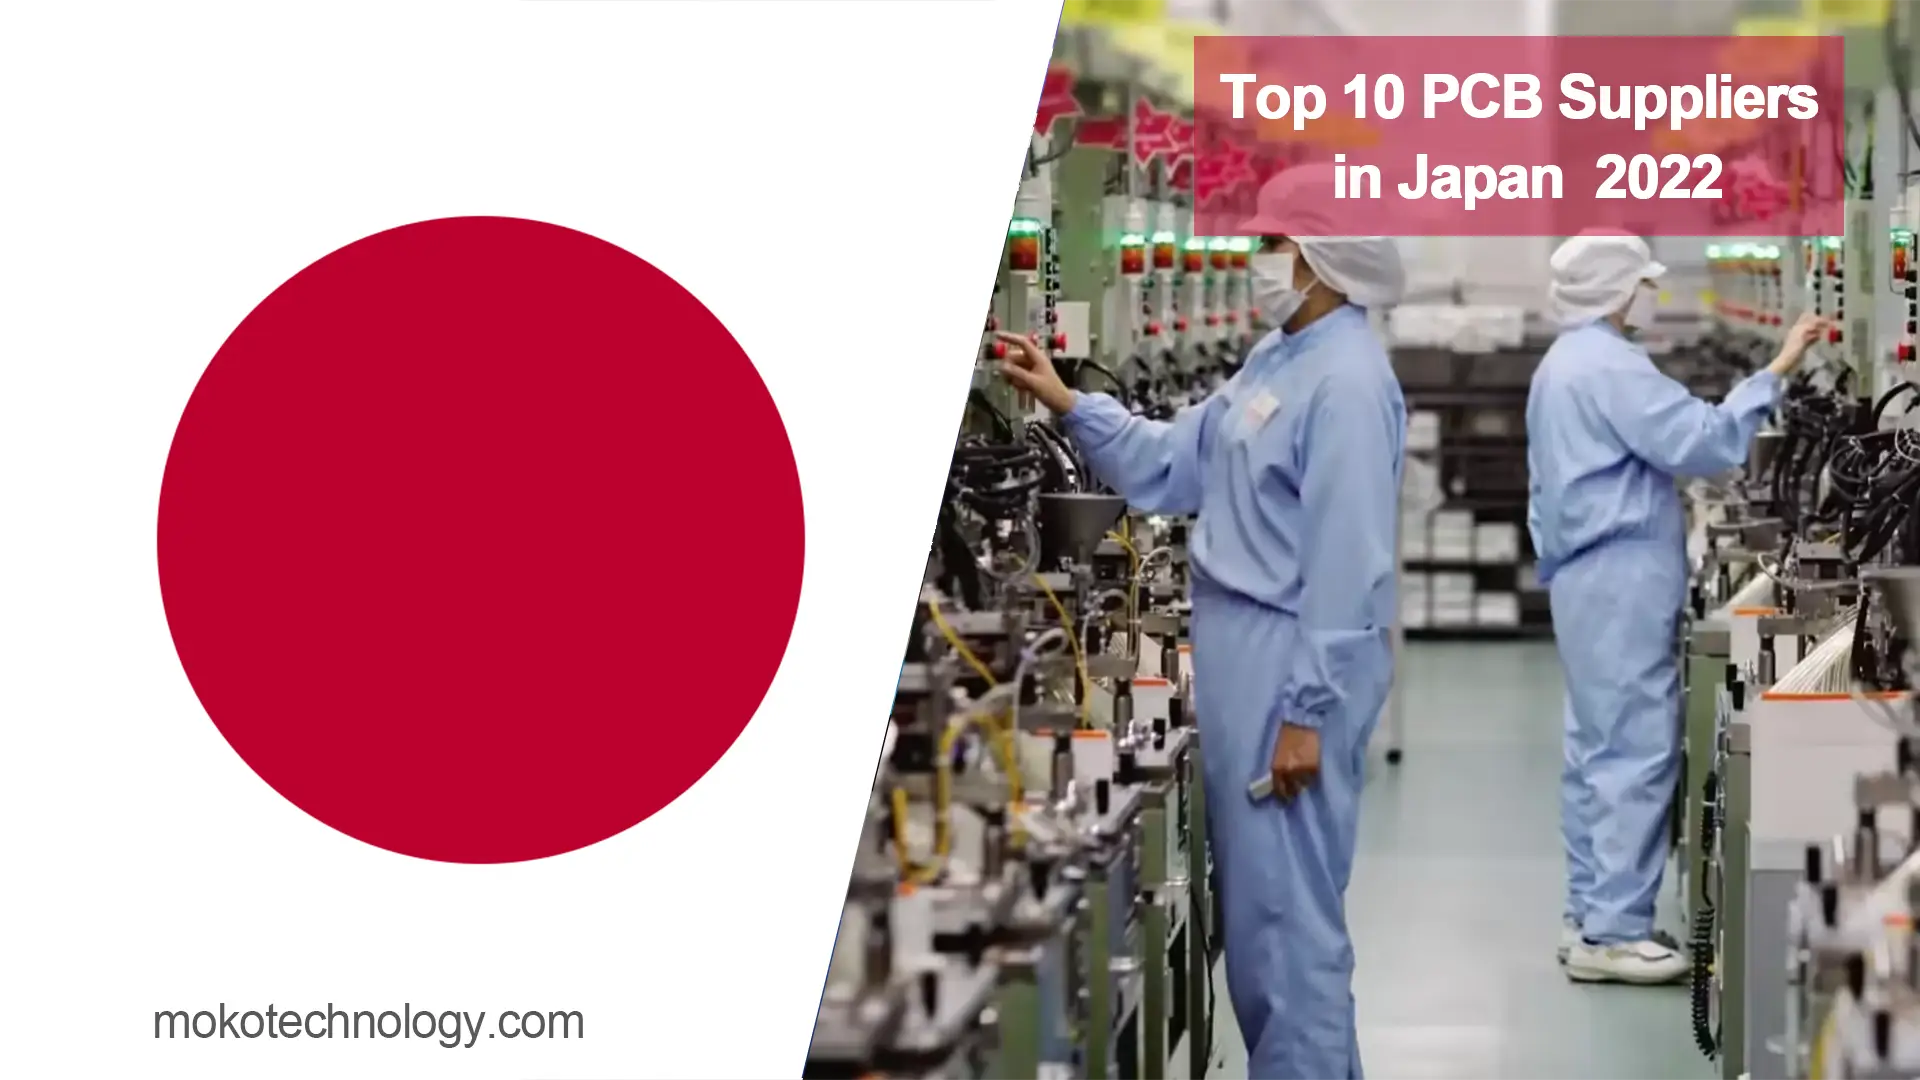 Top 10 PCB Suppliers in Japan 2022